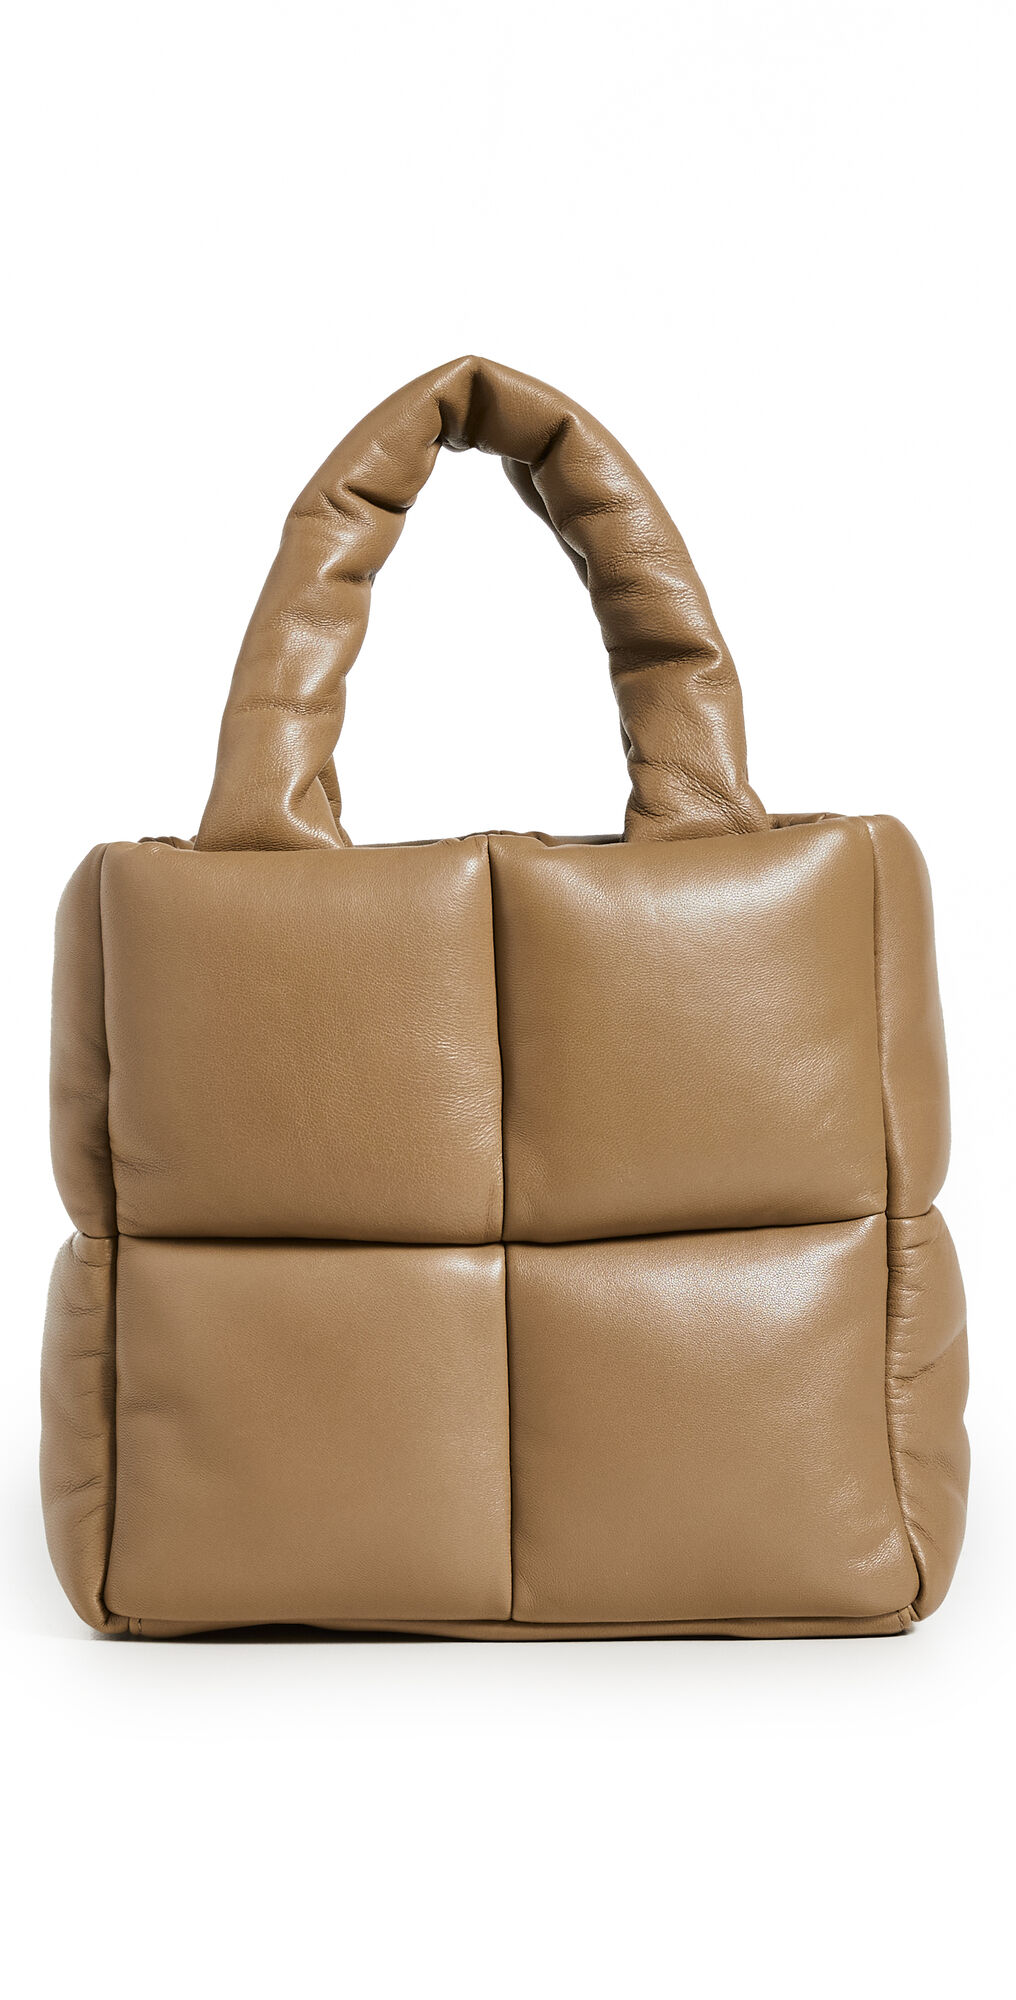 STAND STUDIO Rosanne Puffy Bag Sand One Size  Sand  size:One Size